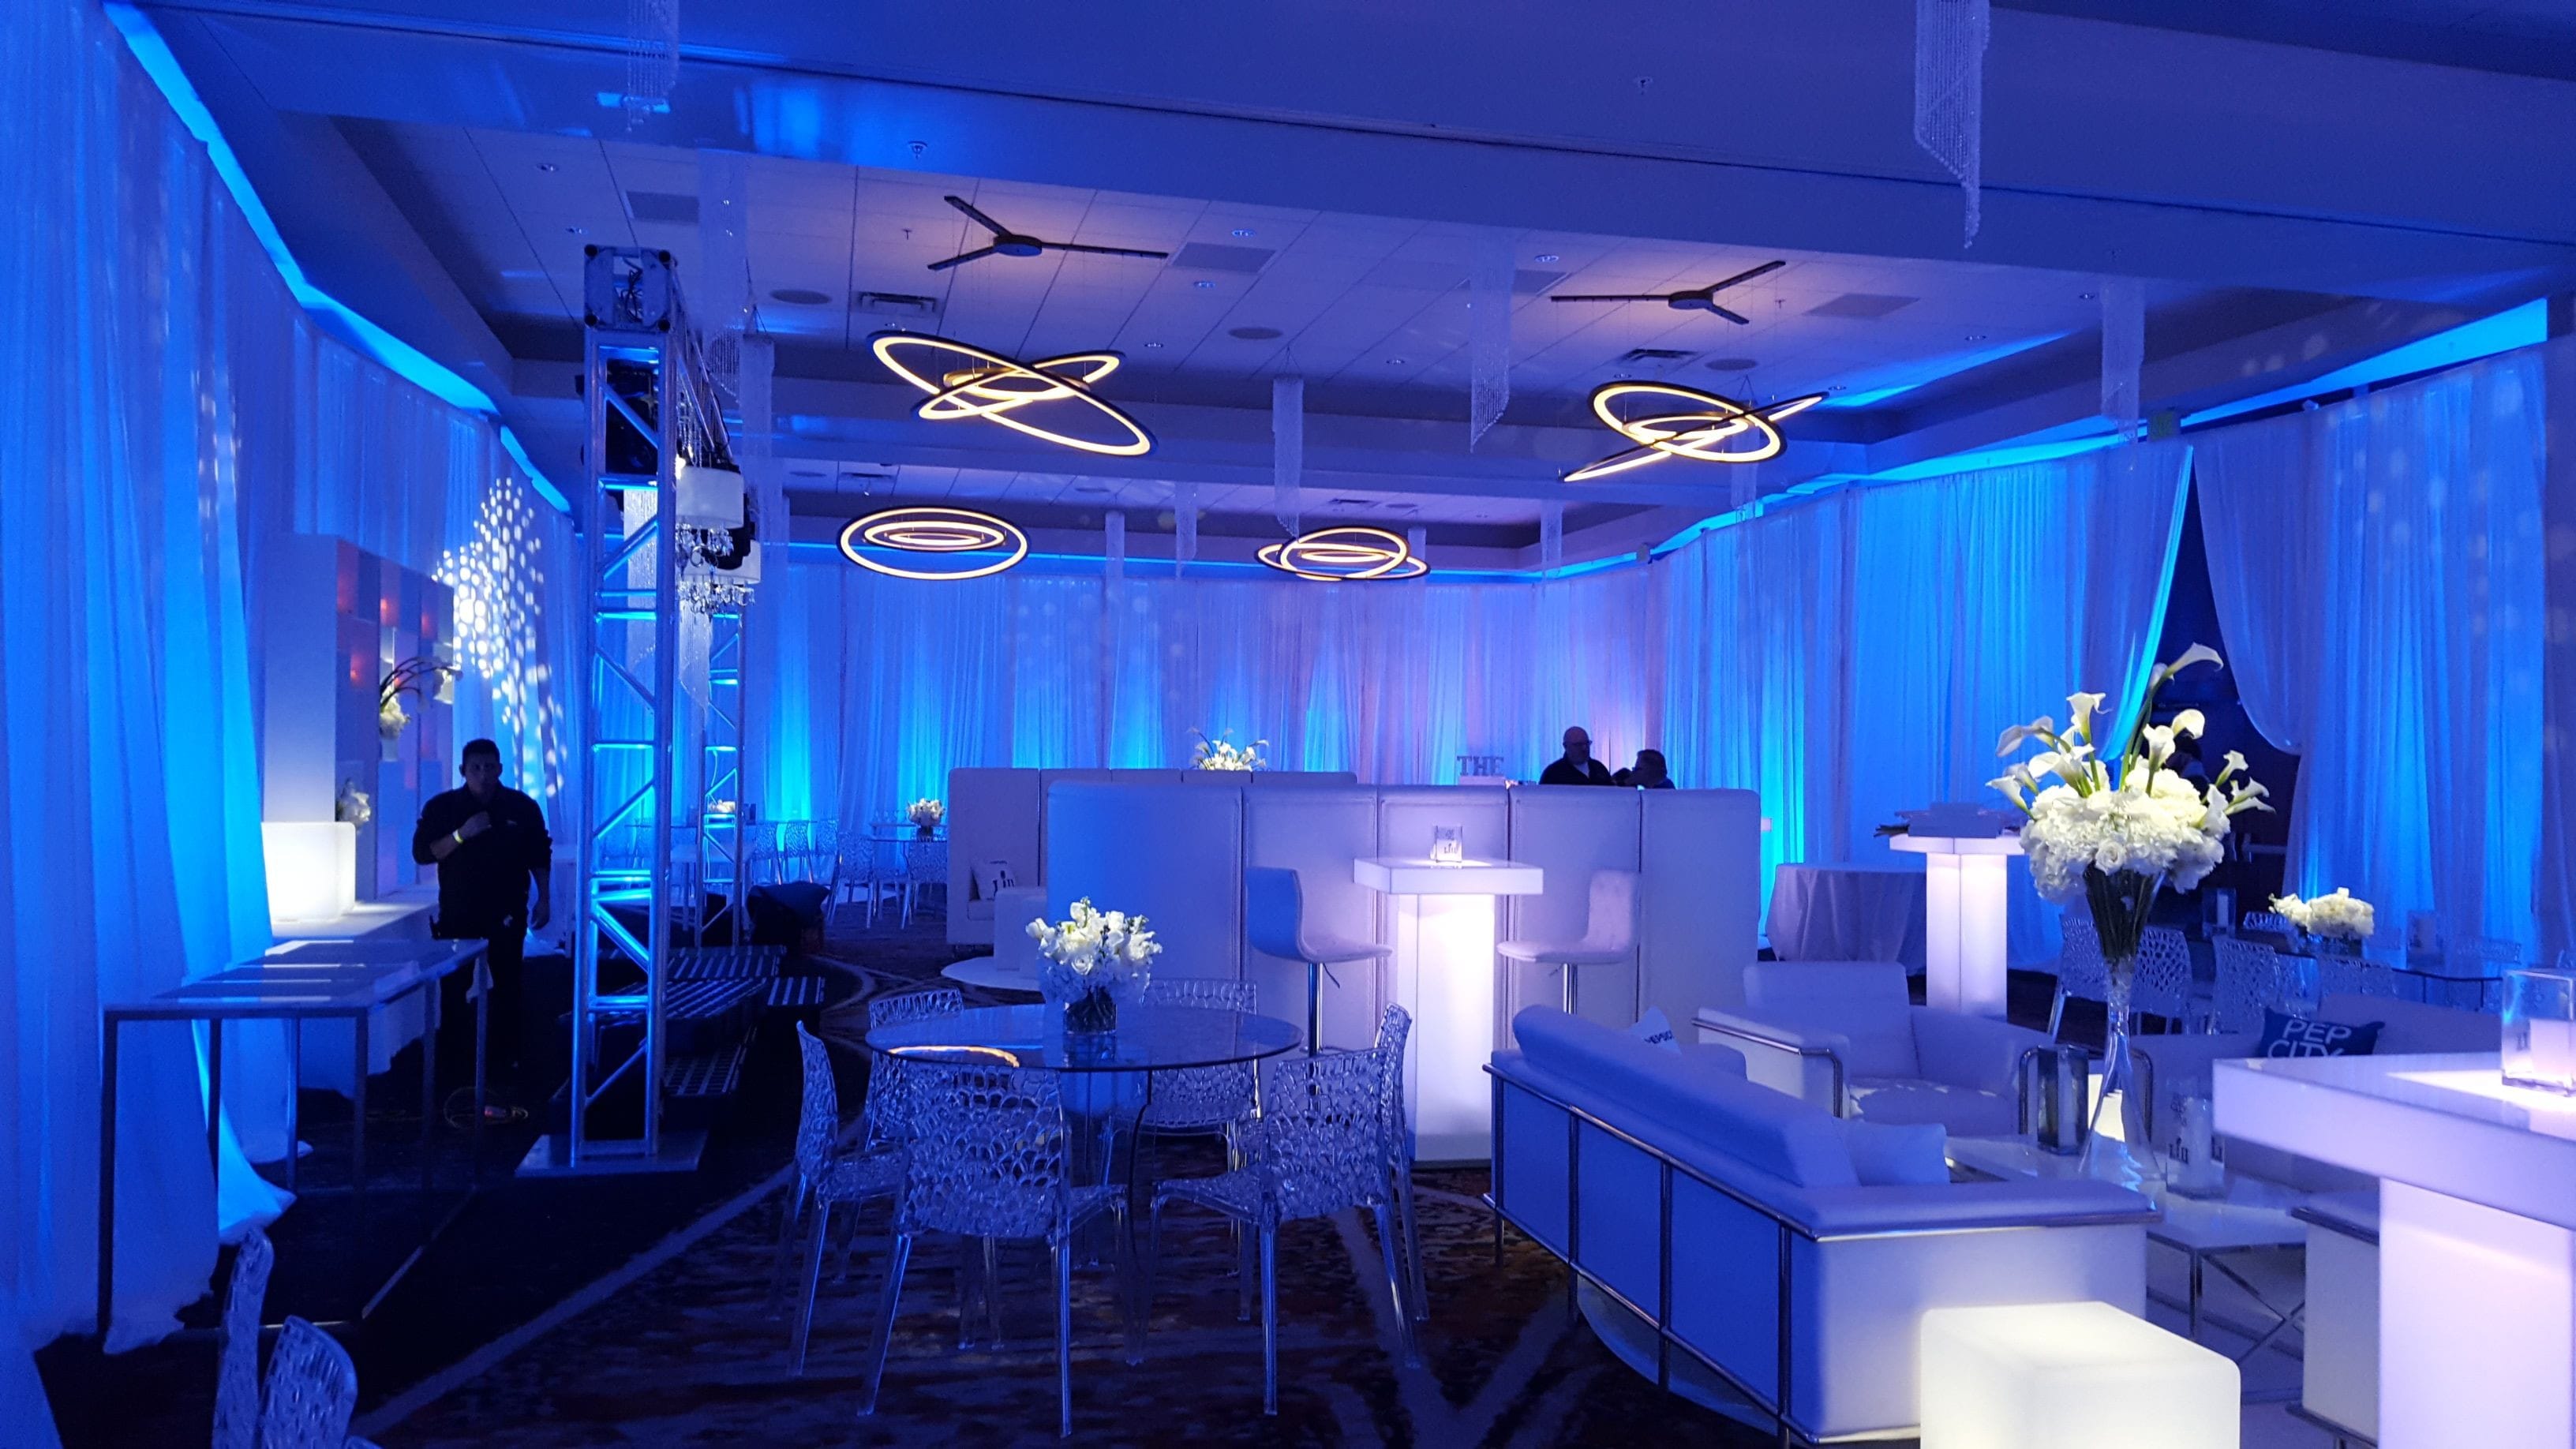 Blue up lighting with glowing cocktail tables, pin spots and gobos for a pre Super Bowl party at the Minneapolis Renaissance Depot Hotel.